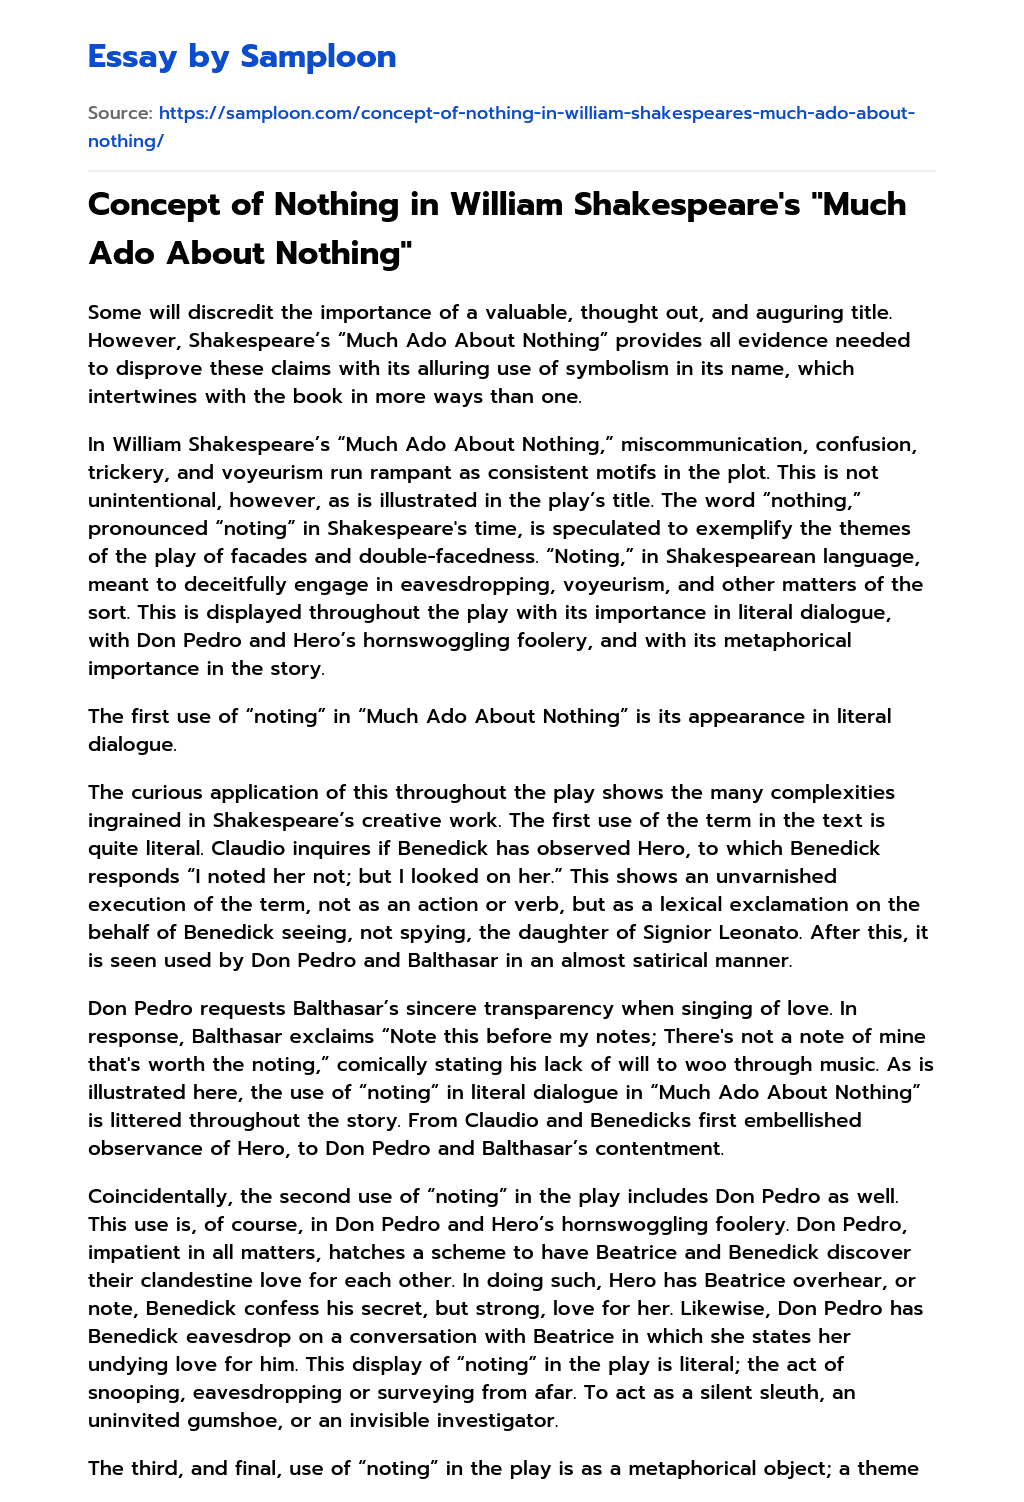 Concept of Nothing in William Shakespeare’s “Much Ado About Nothing” essay